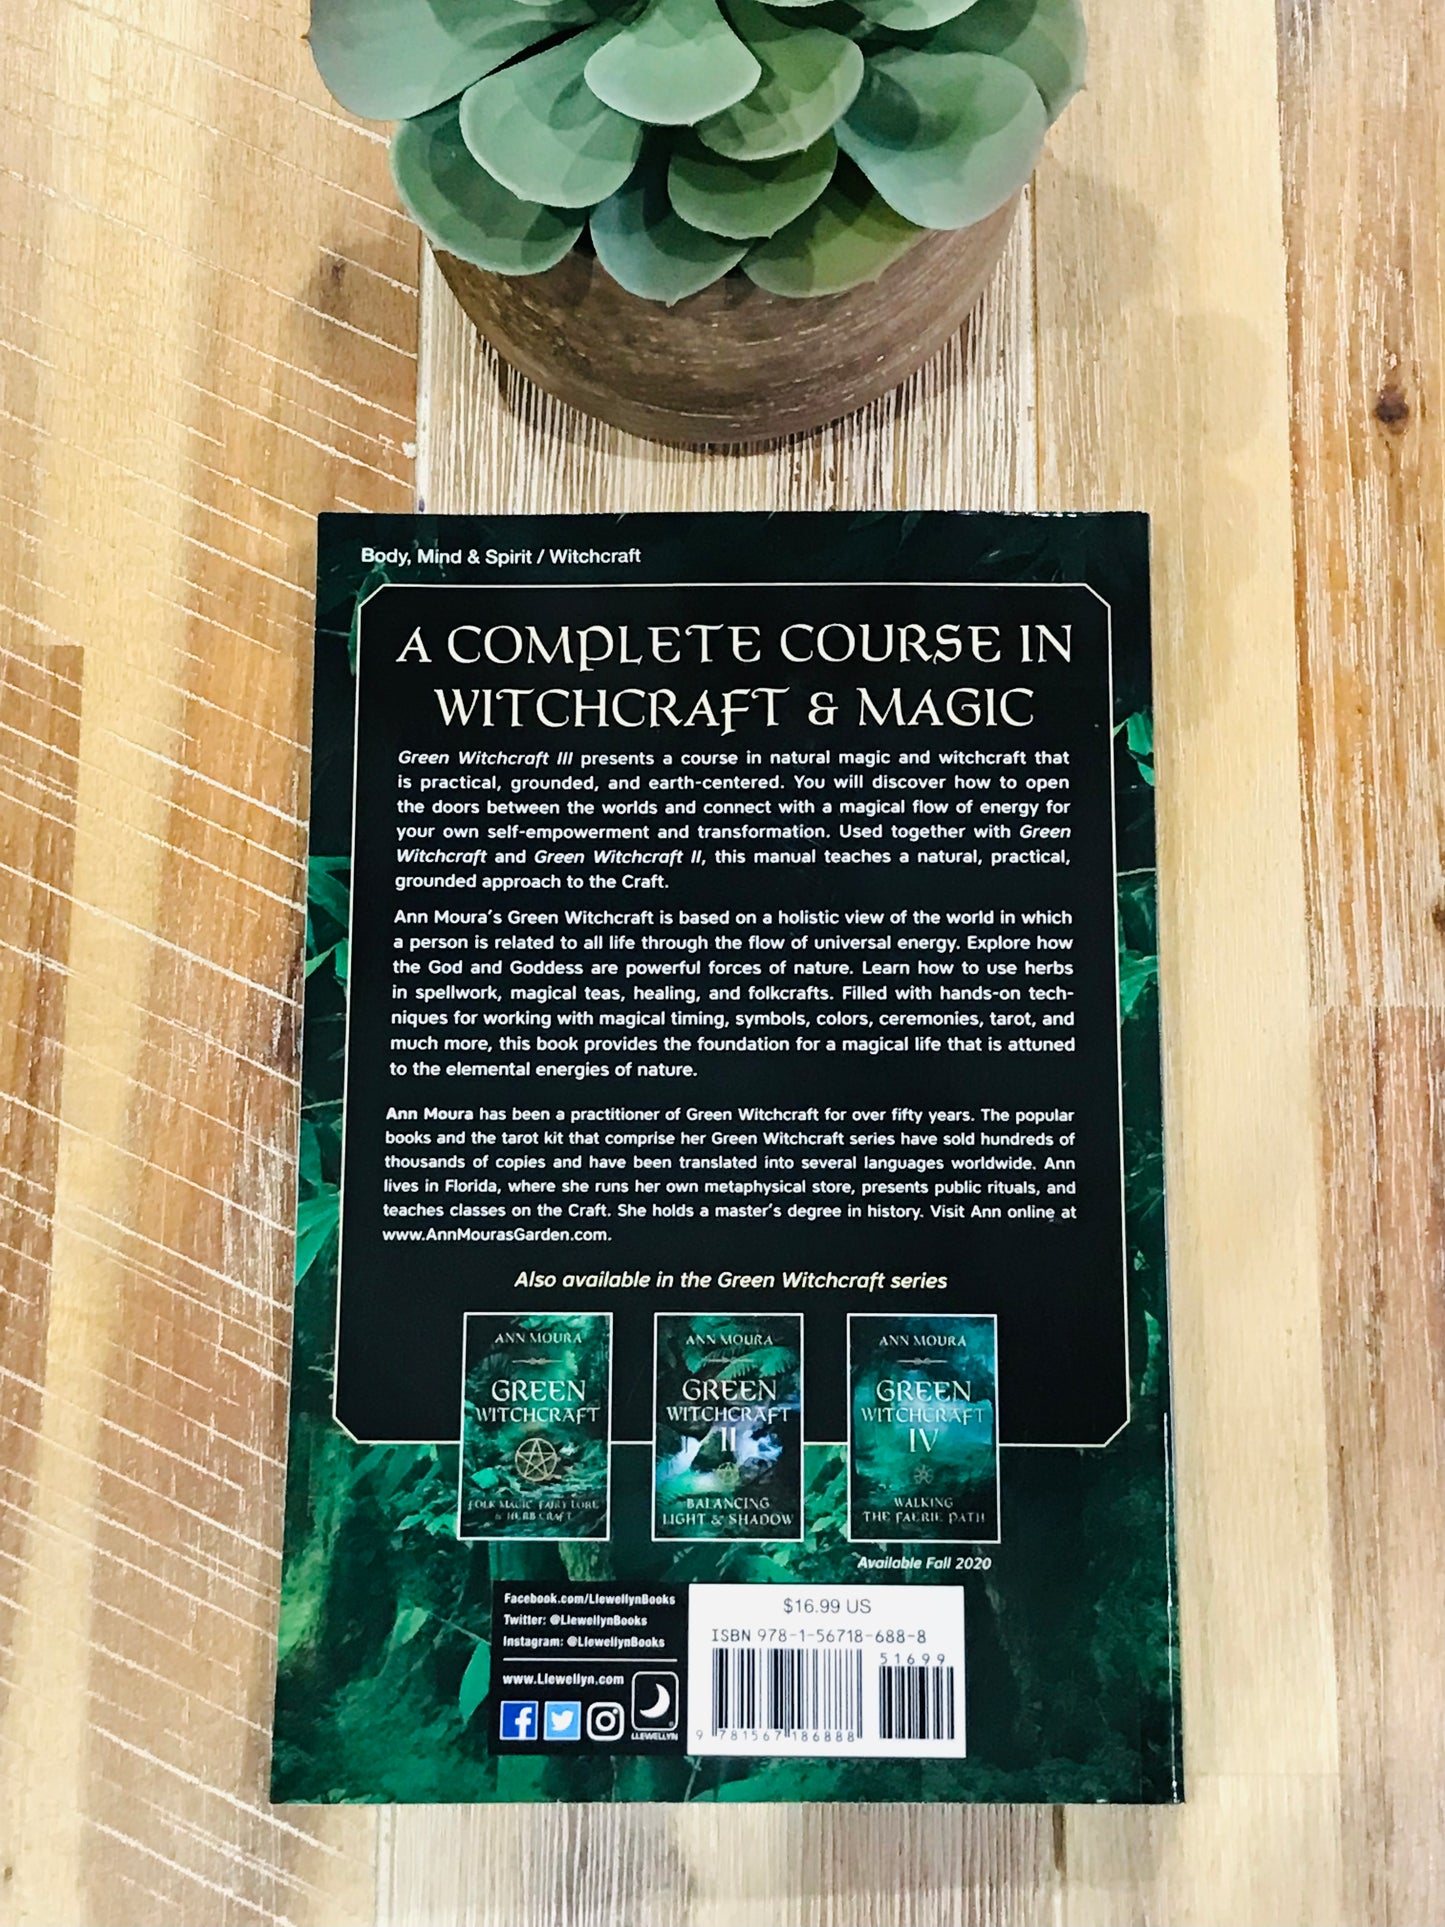 Green Witchcraft III ~ The Manual